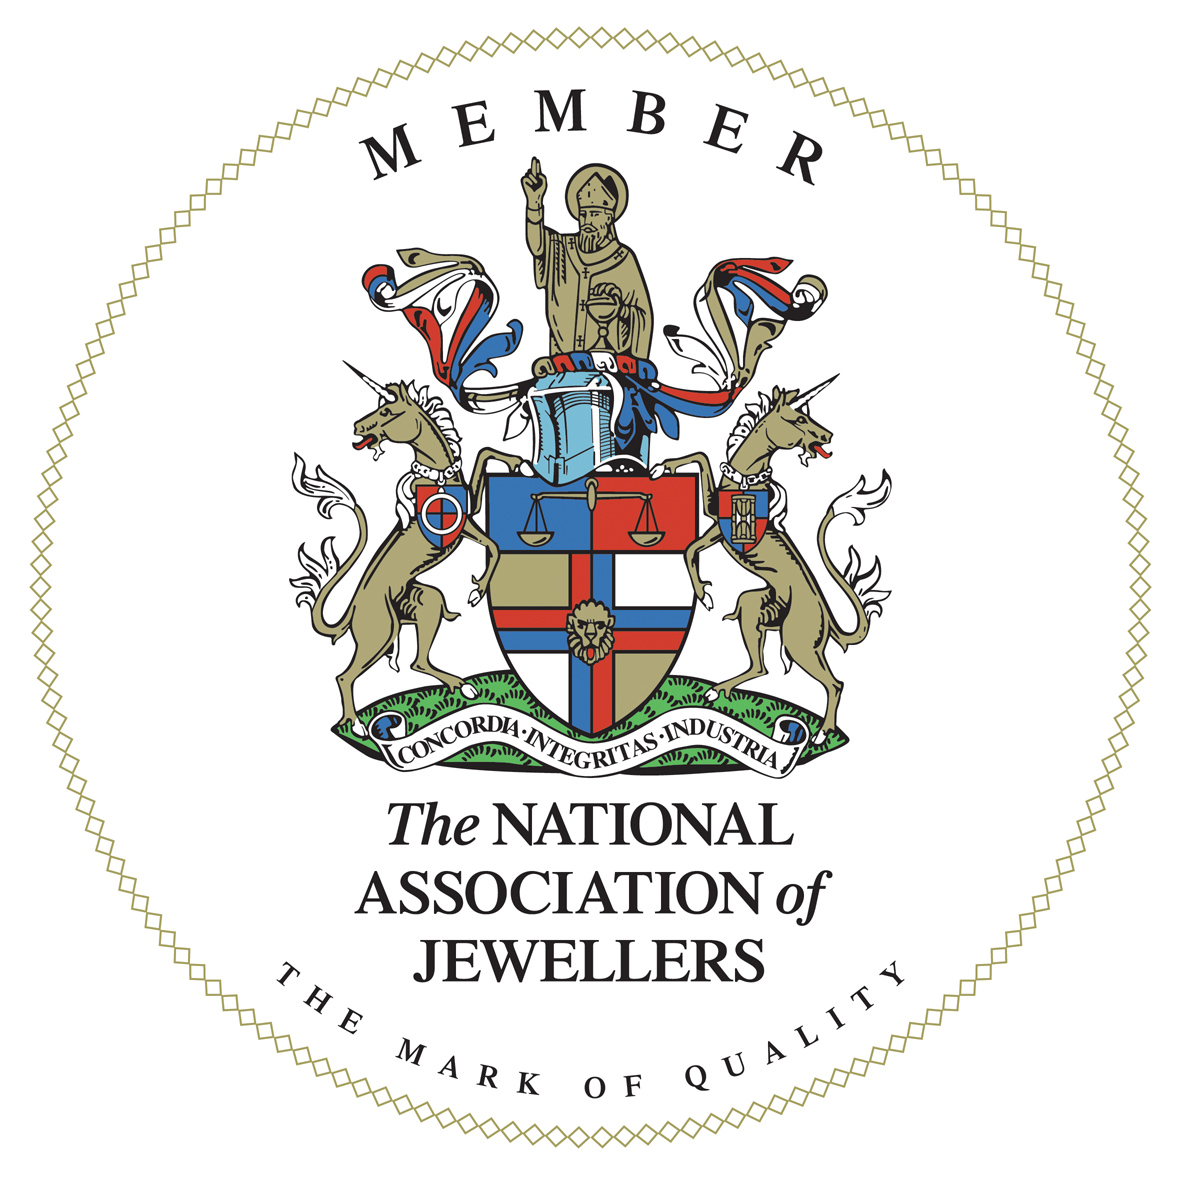 National Association of Jewellers Coat of Arms